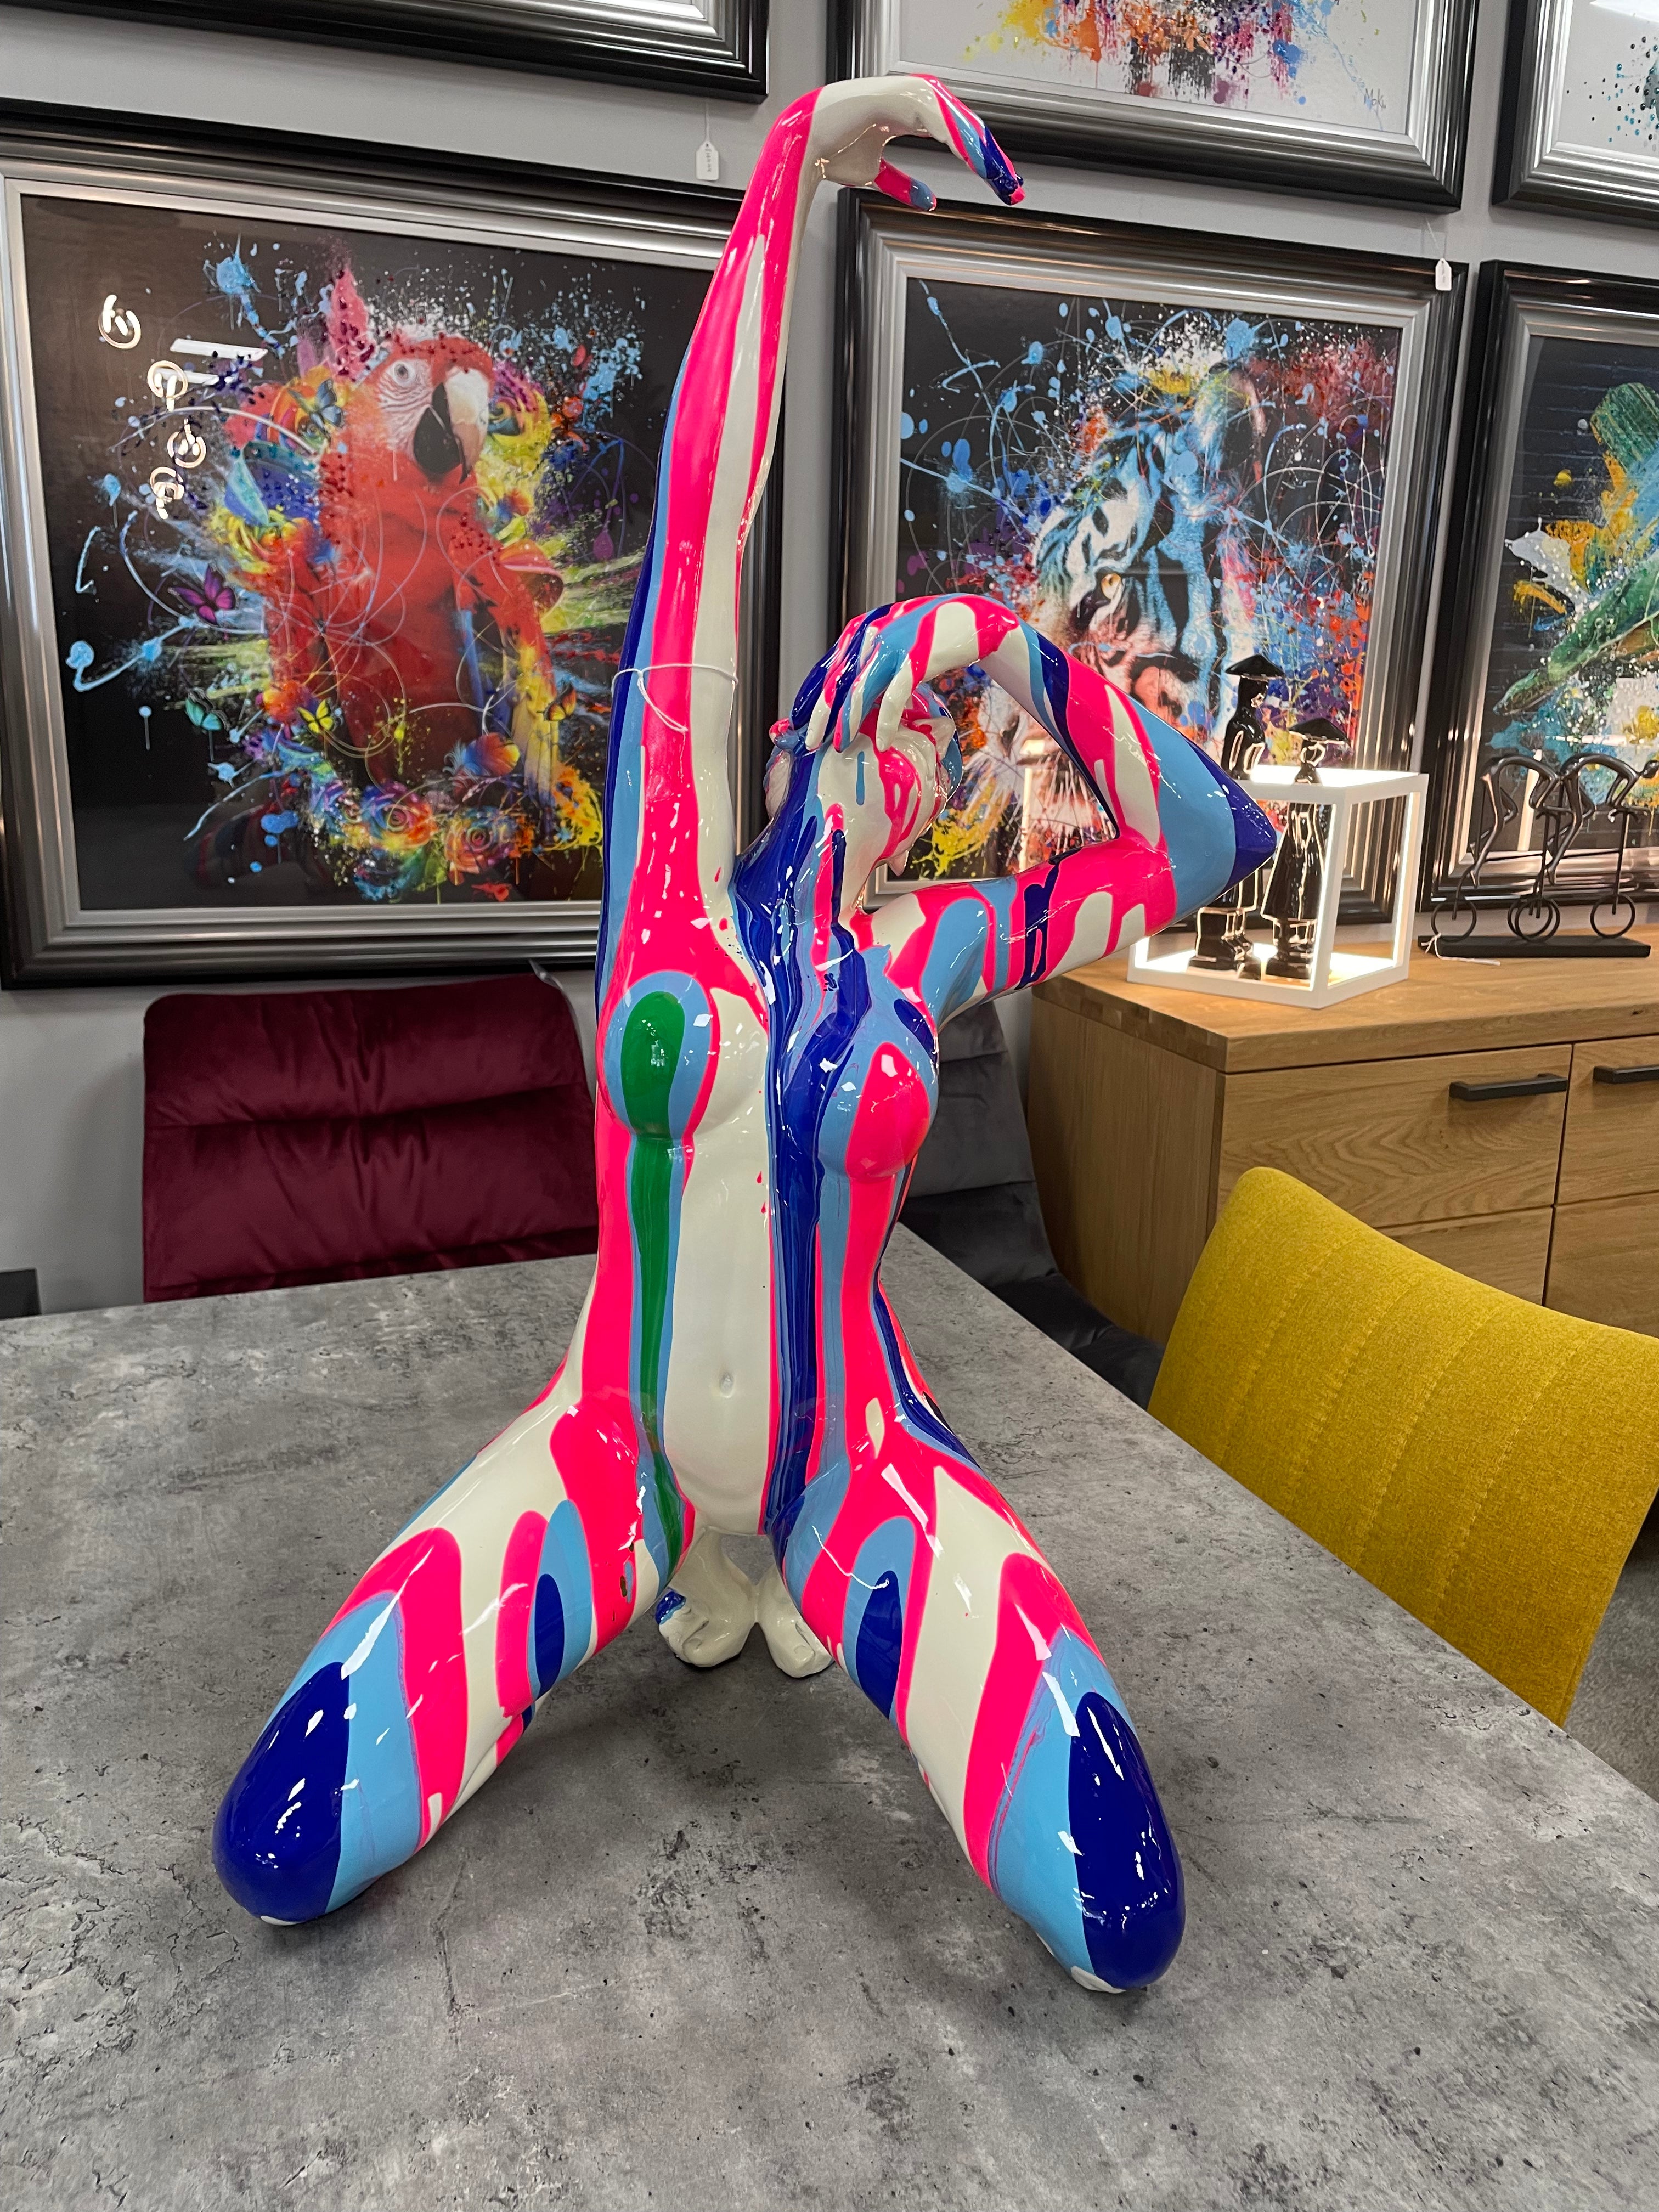 Pink and Blue Lady Sculpture - Raised Arm